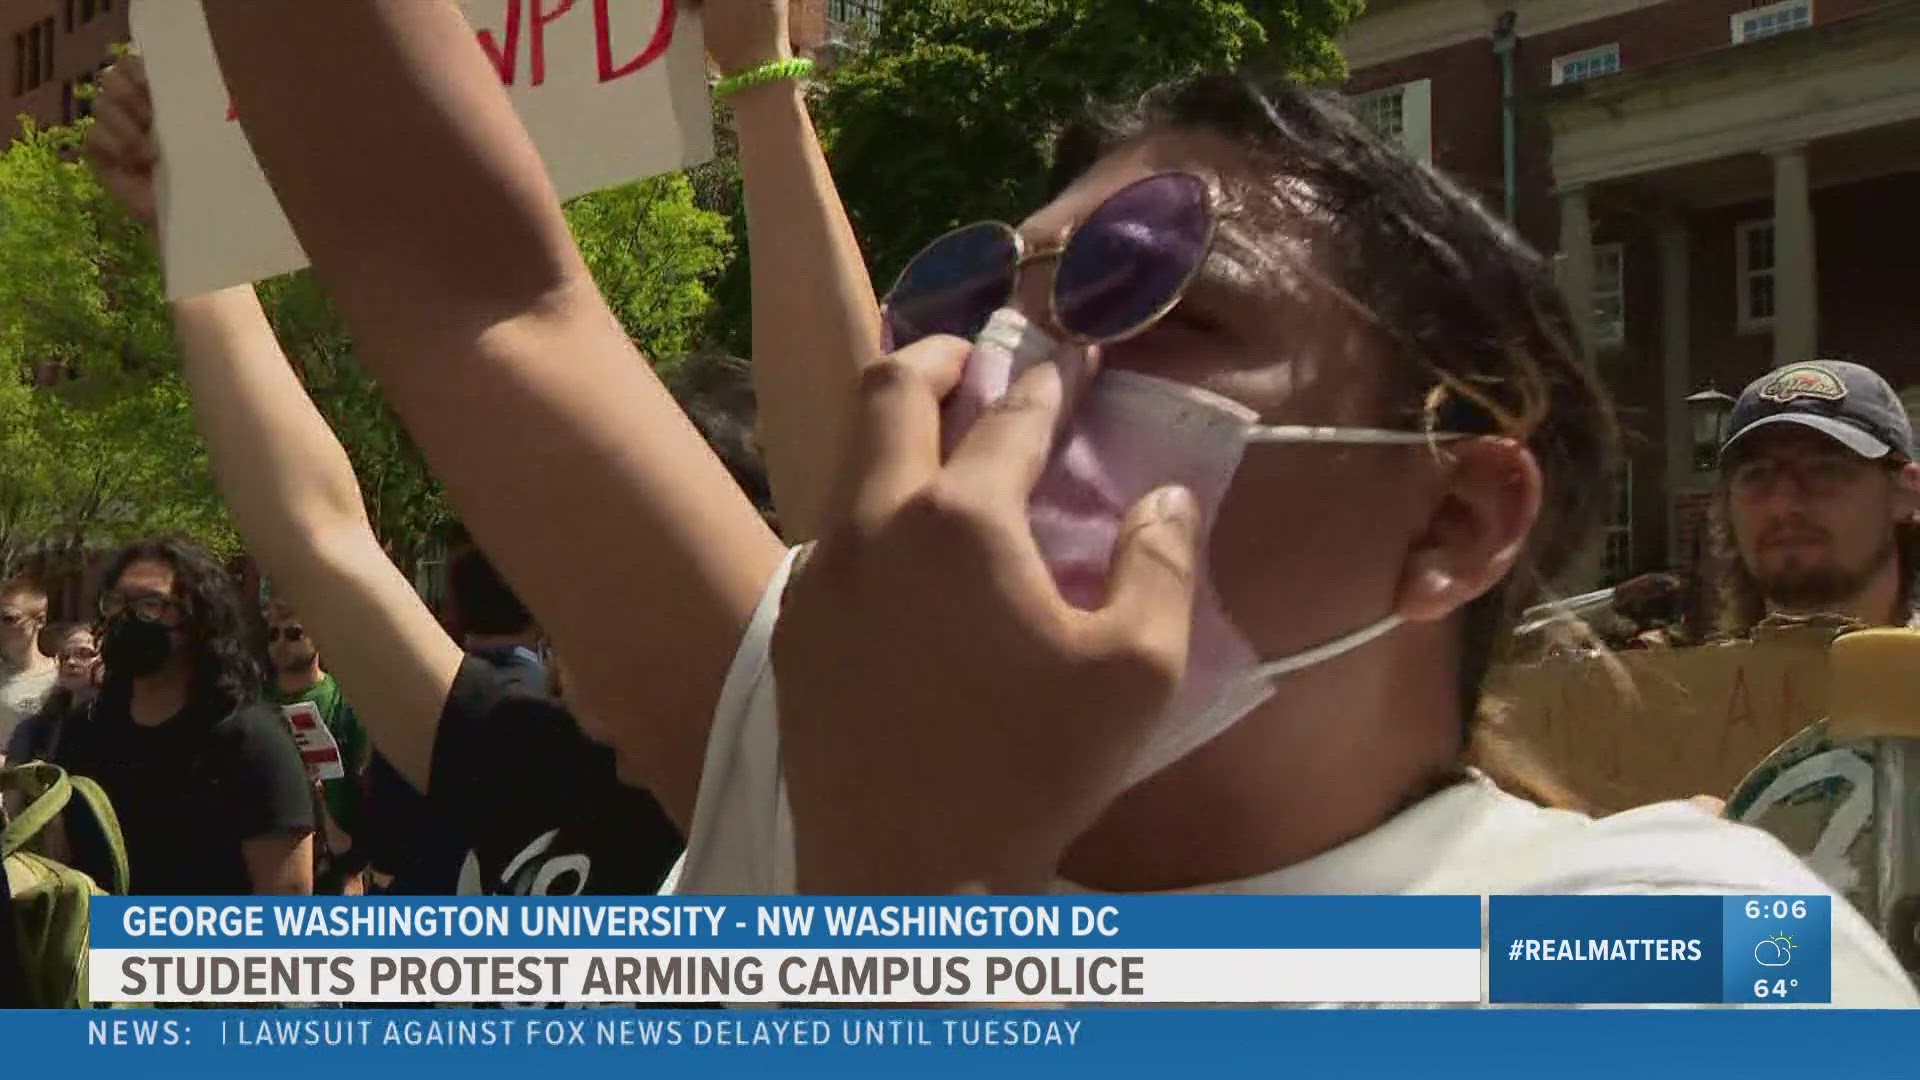 Students at George Washington University protested after it was announced that some officers at George Washington University would be armed.